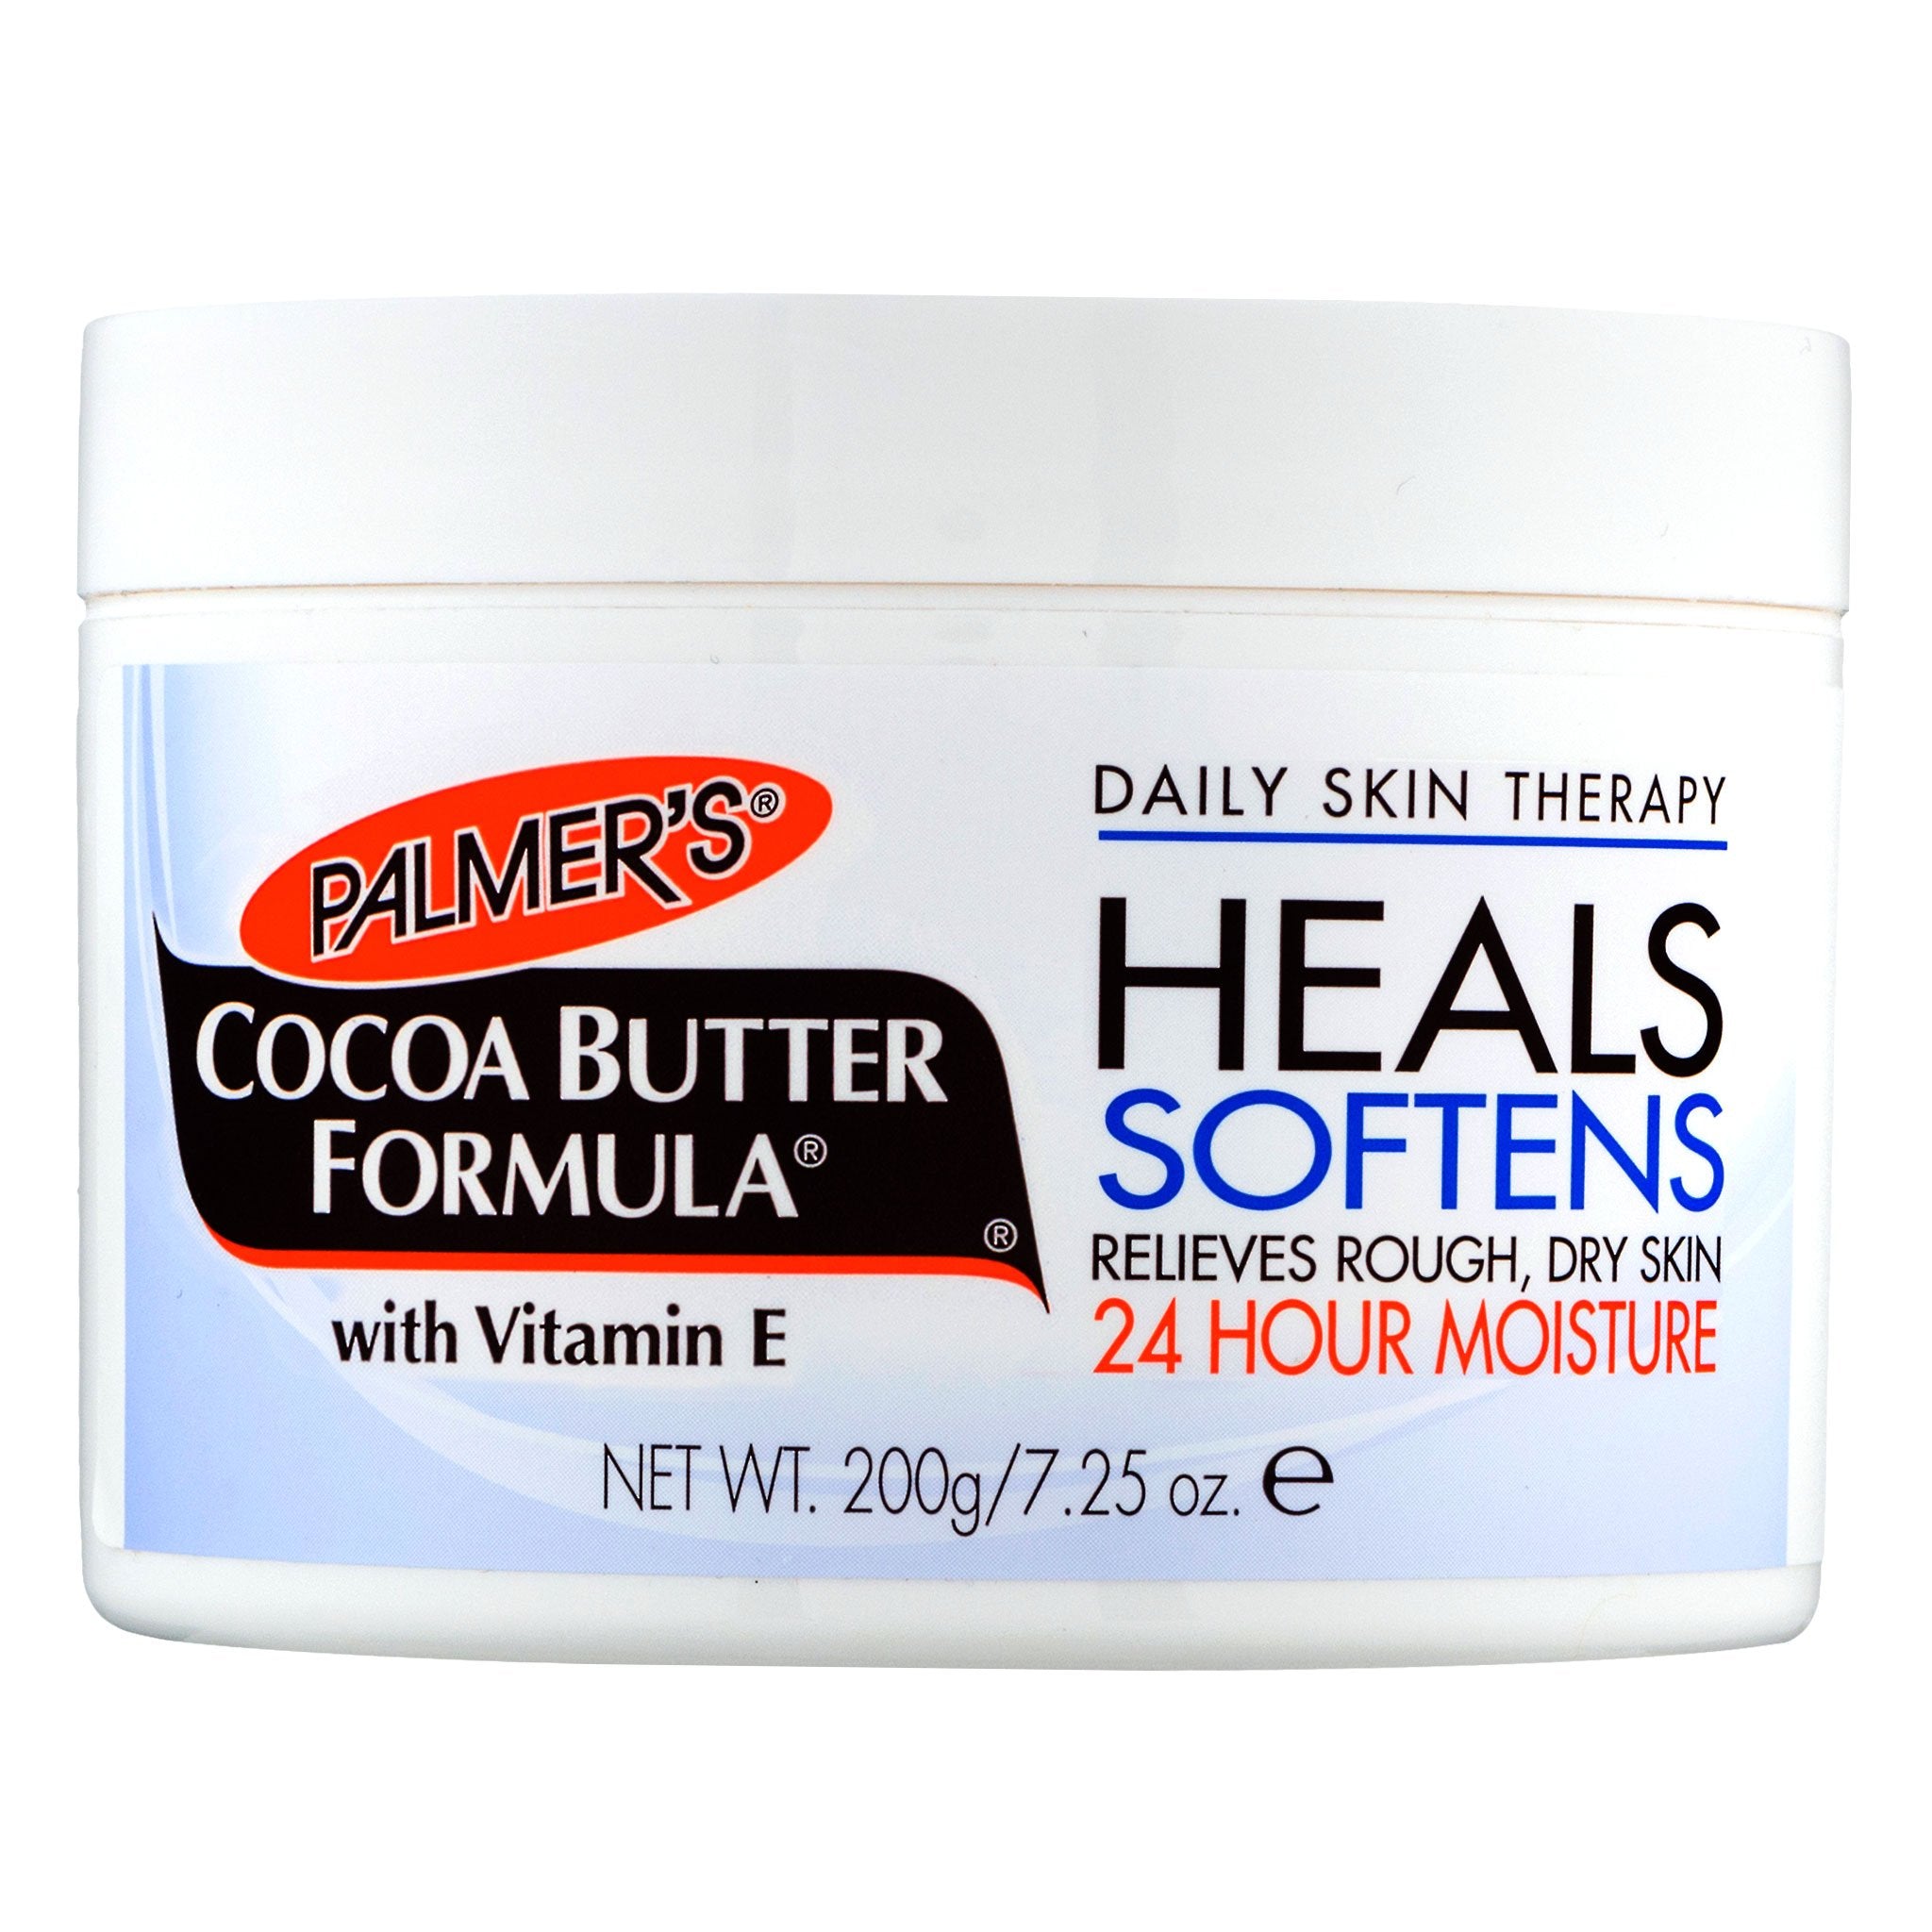 Palmers Cocoa Butter Formula with Vitamin E 200g  HealsSoftens Relives Rough and Dry Skin